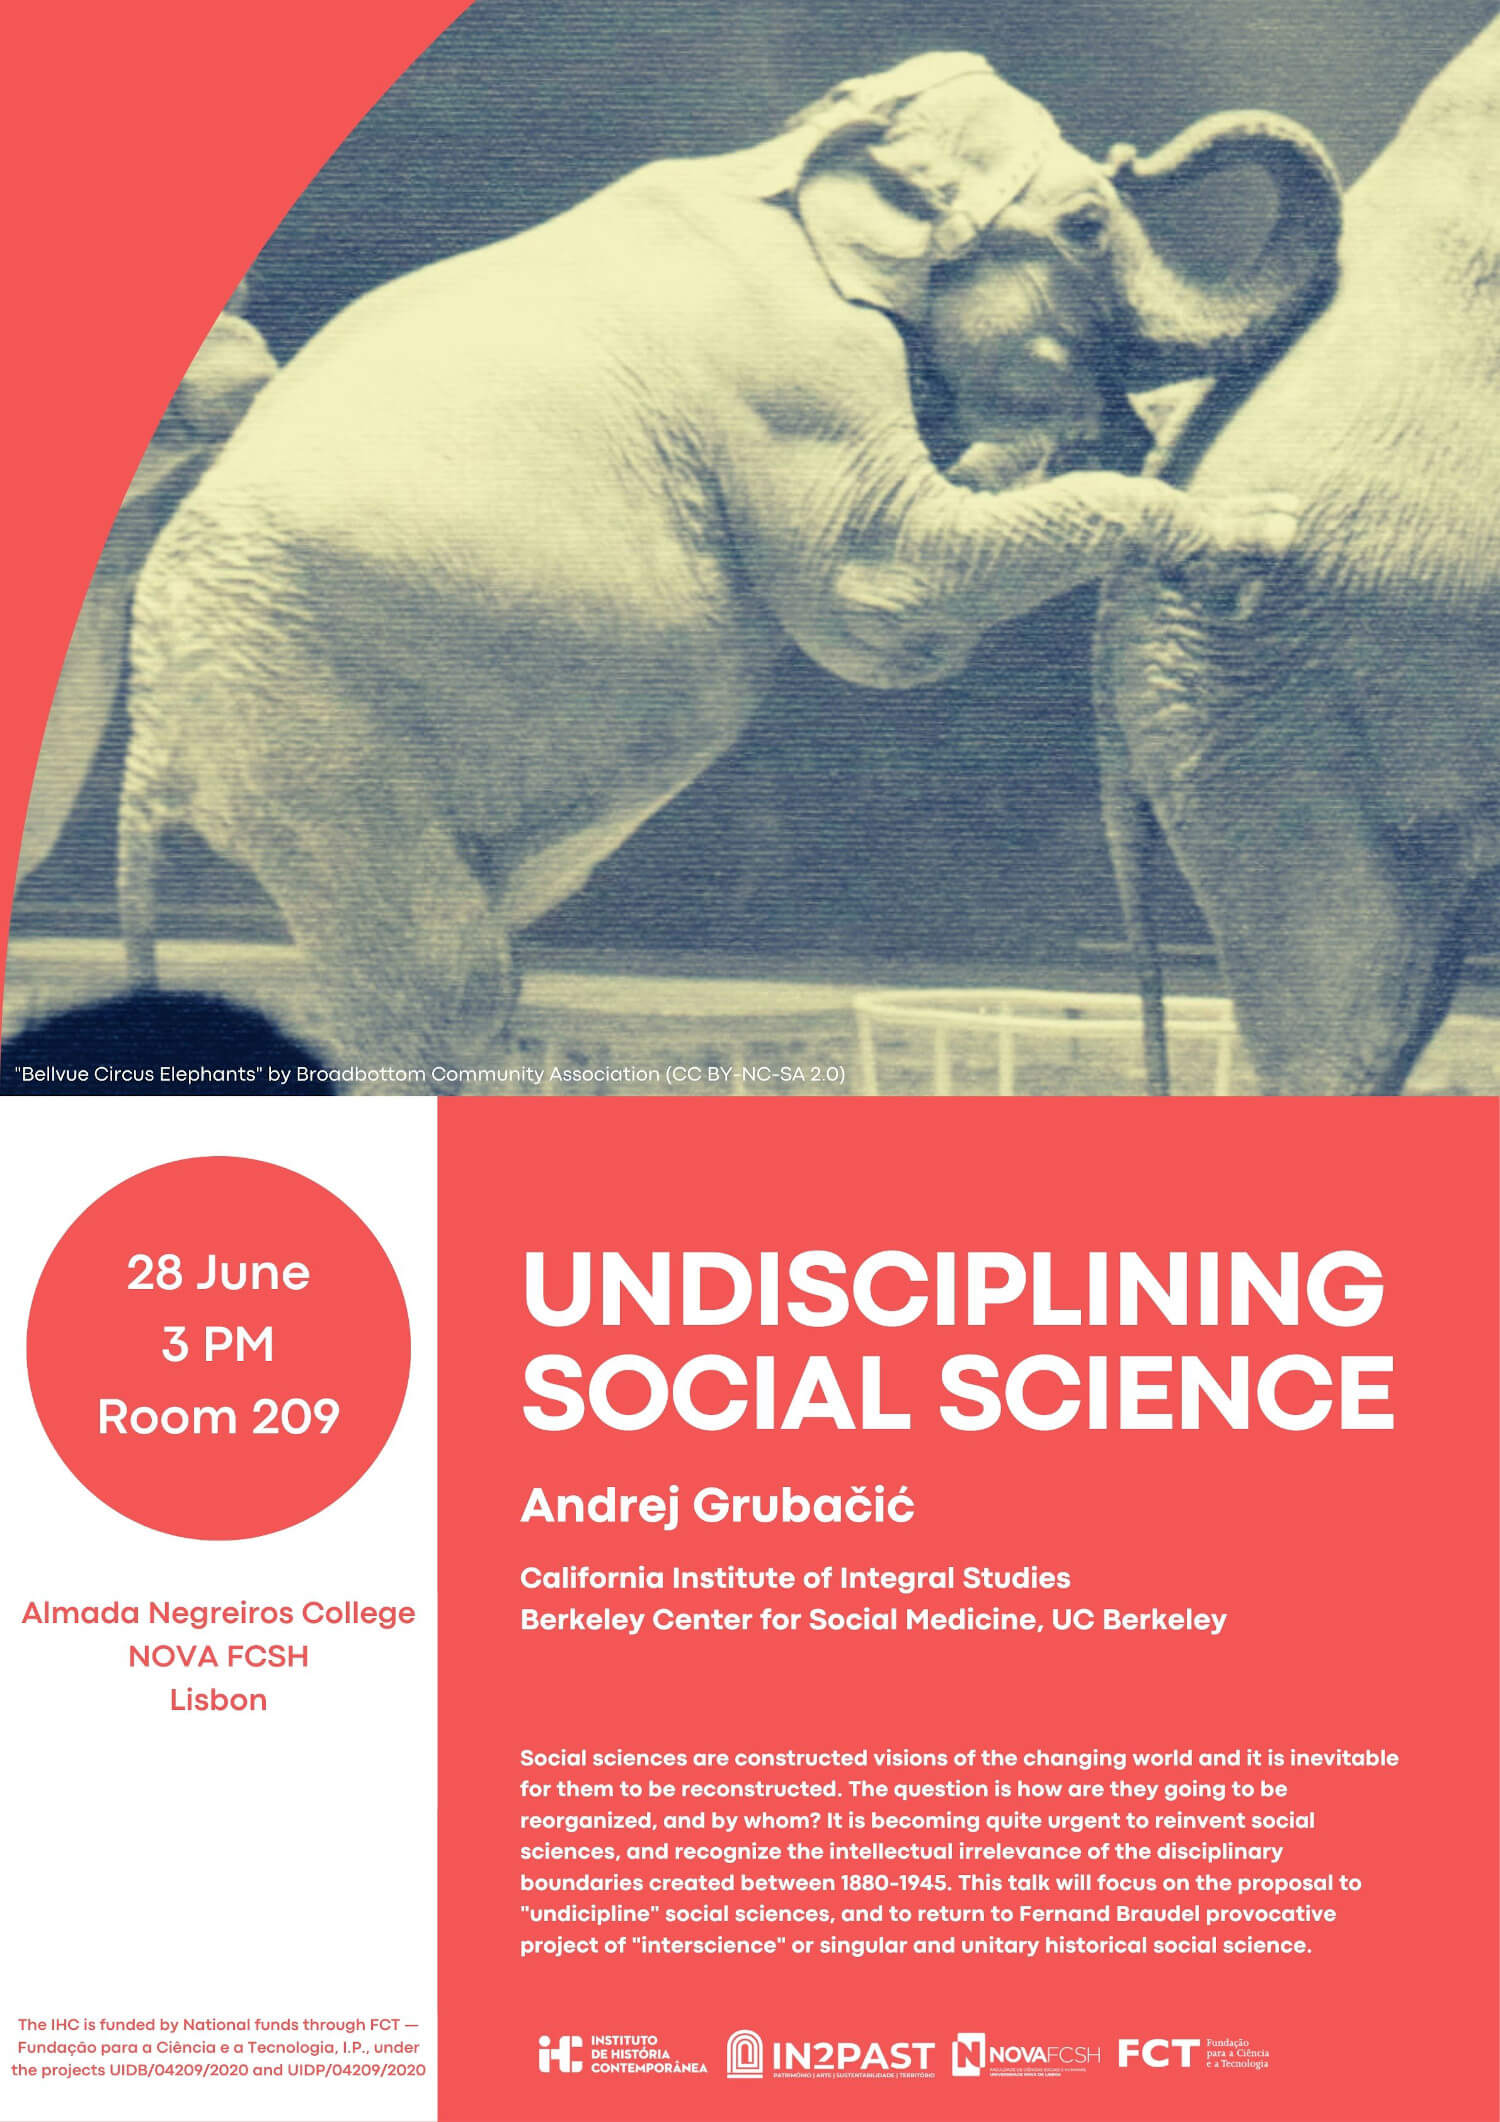 Poster for the lecture "Undisciplining Social Science", by Andrej Grubačić. 28 June at 3 PM, on Room 209 of the Almada Negreiros College.